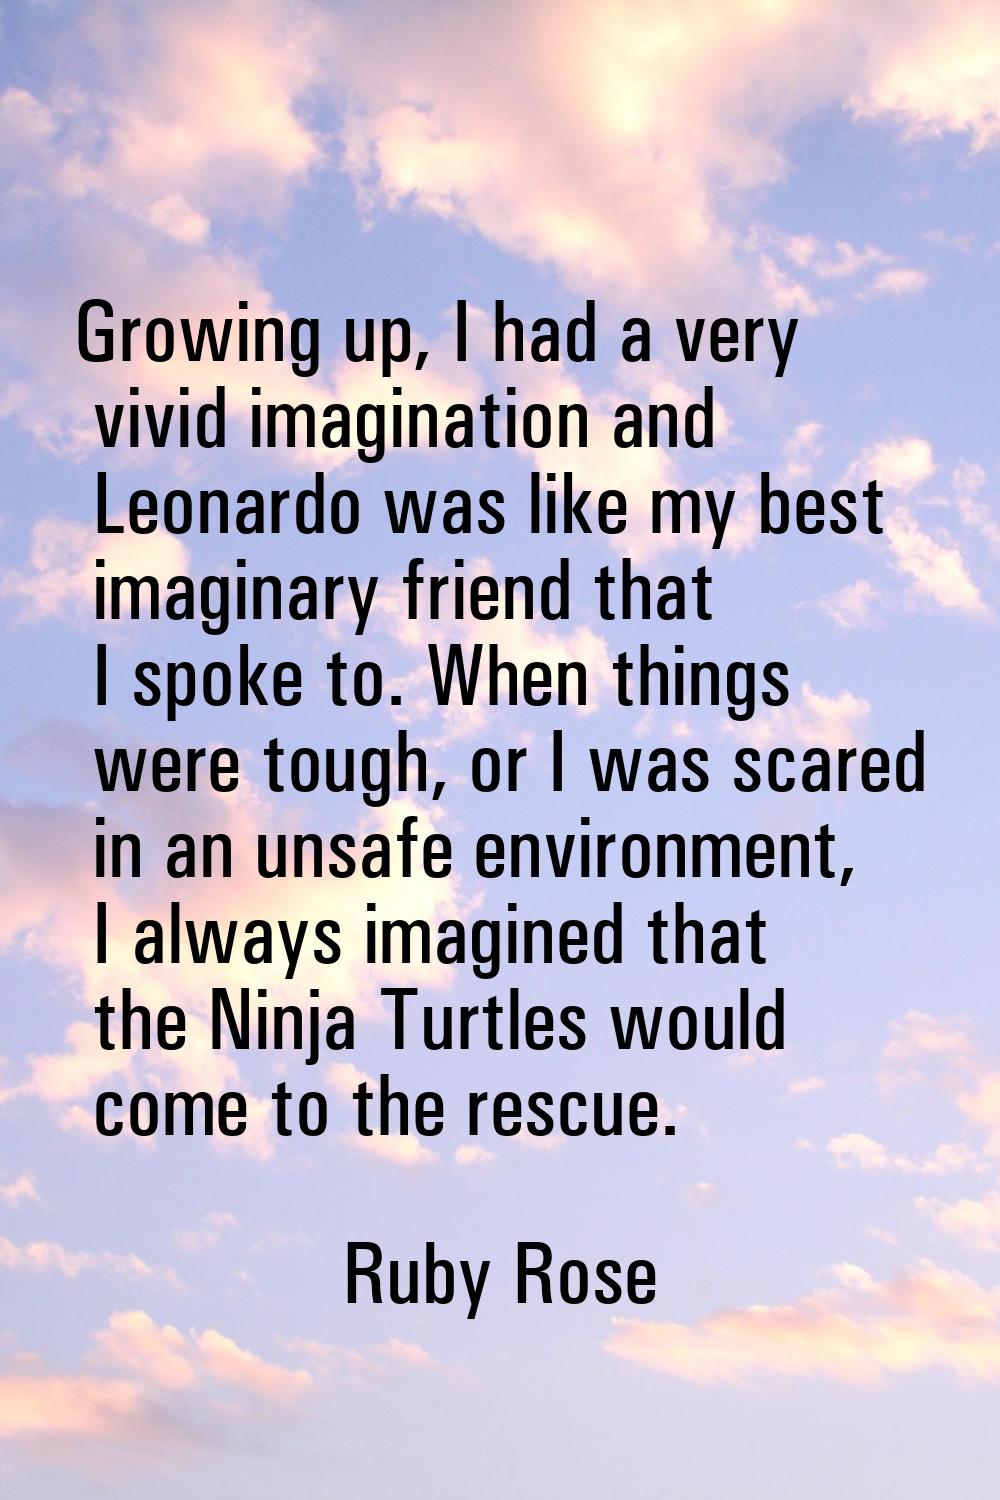 Growing up, I had a very vivid imagination and Leonardo was like my best imaginary friend that I sp